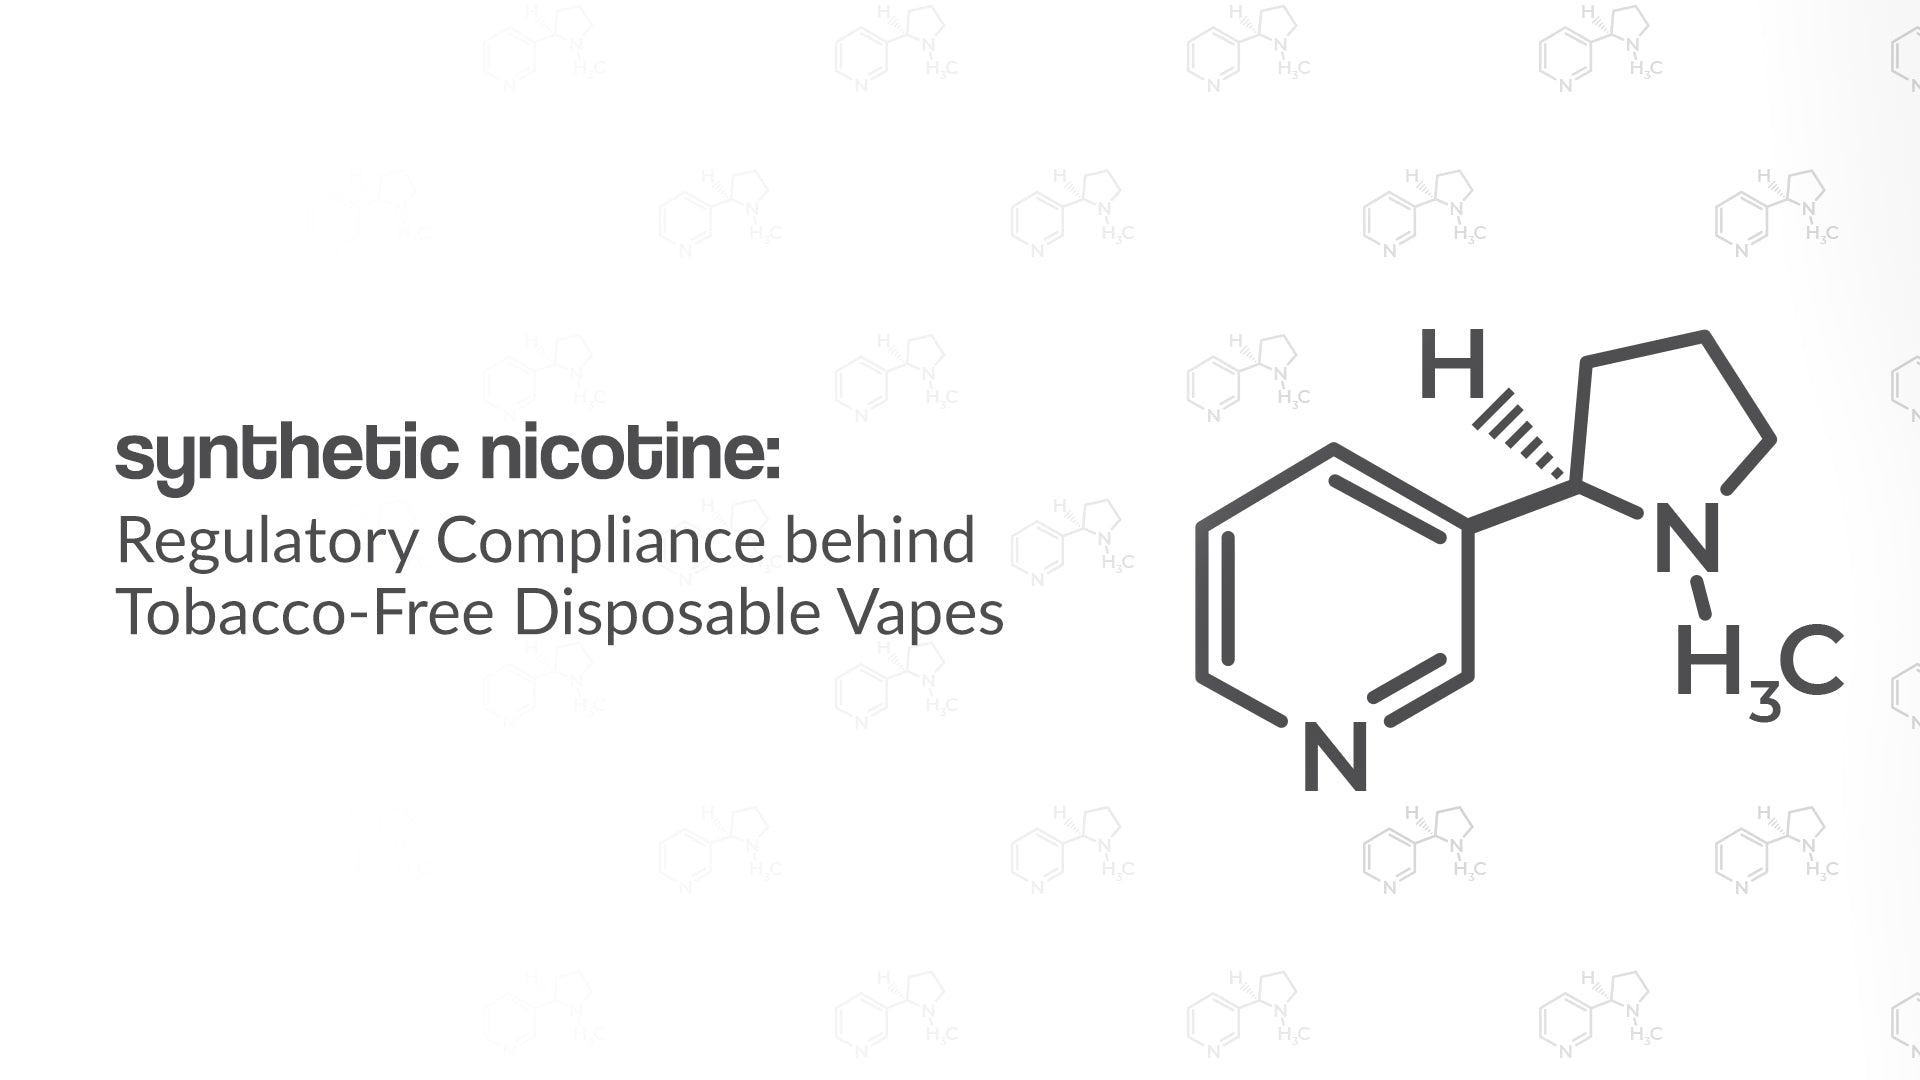 Synthetic Nicotine: Regulatory Compliance behind Tobacco-Free Disposable Vapes